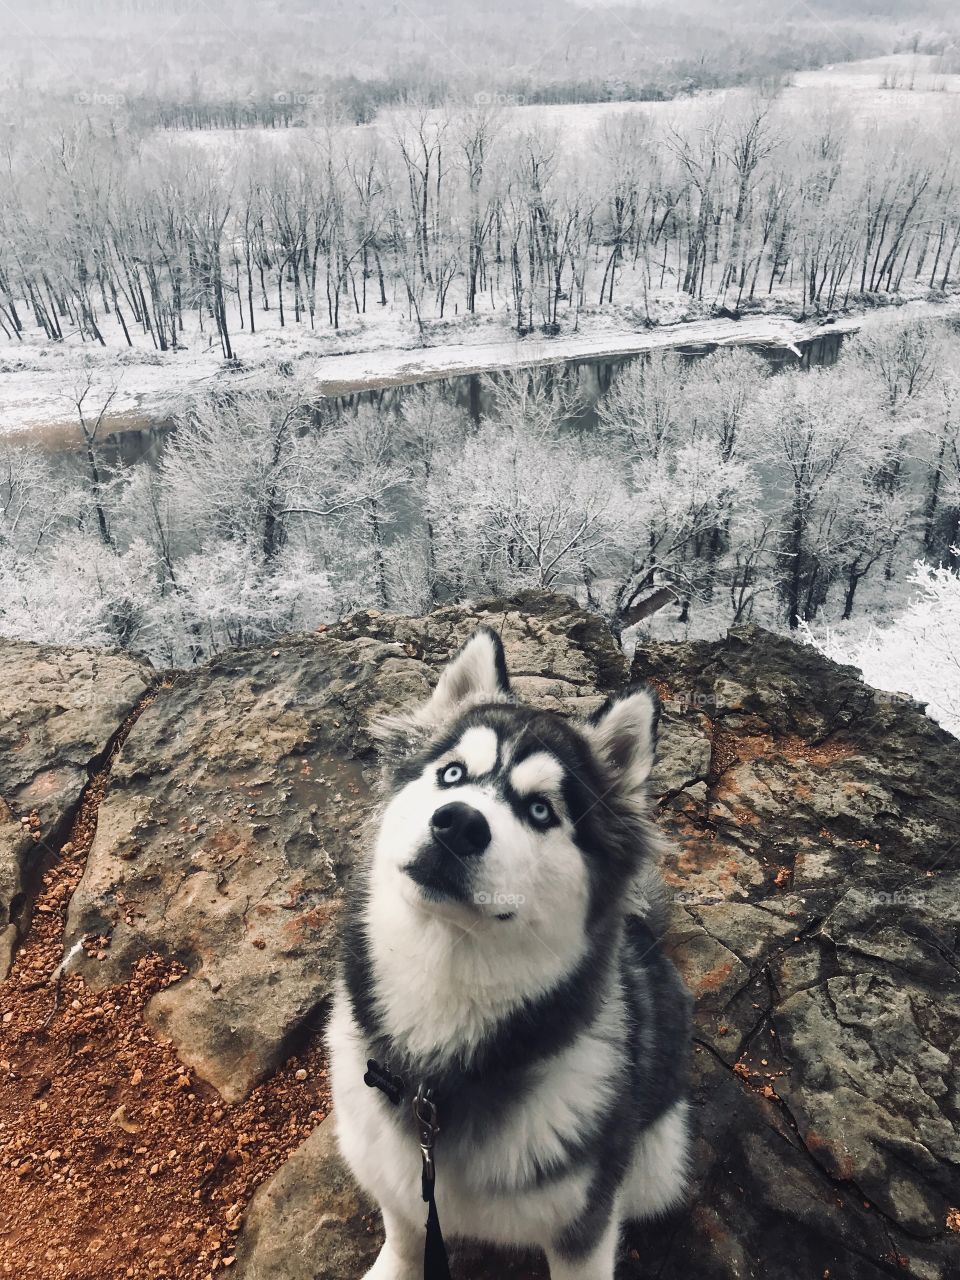 Beautiful Husky on a cliff overlooking a snowy white backdrop.